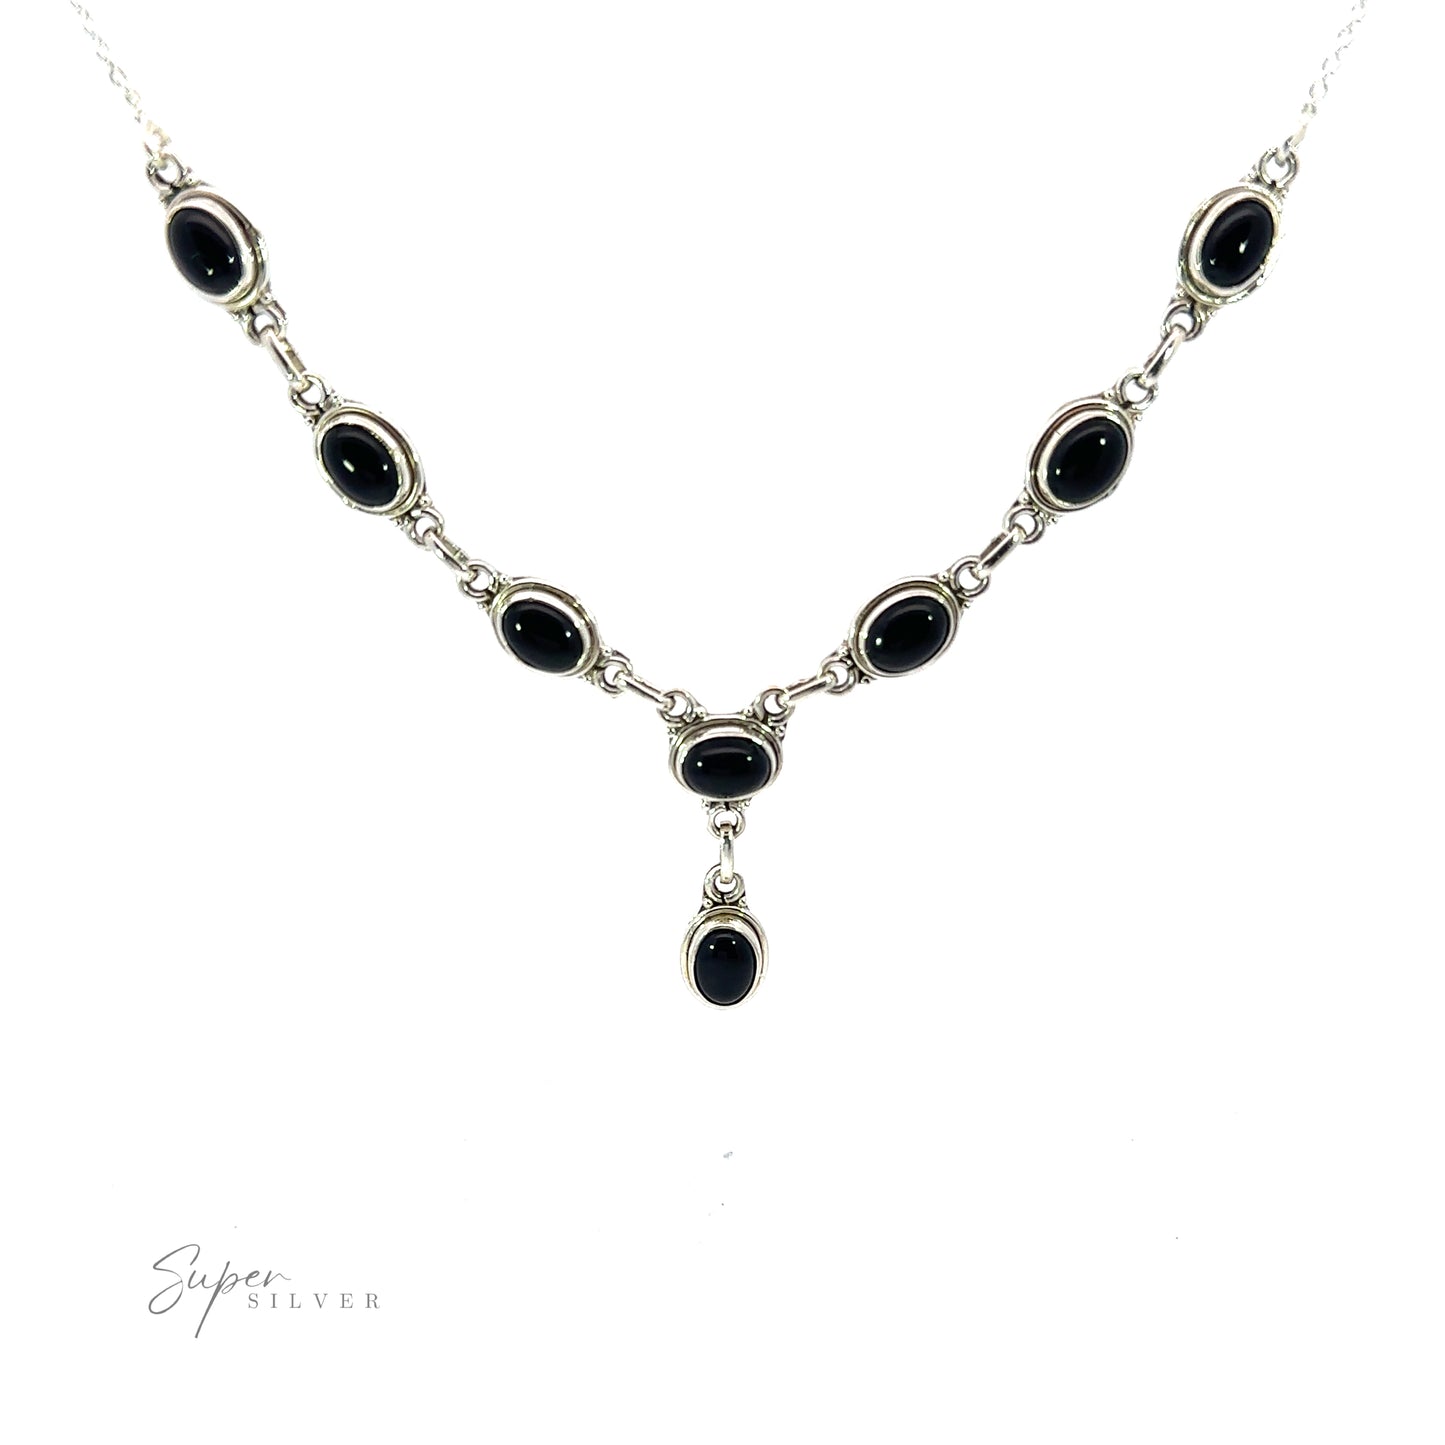 
                  
                    A Simple Oval Y Necklace with Gemstones featuring a series of oval gemstones set in individual links, with one stone hanging from the center. "Super Silver" branding is visible in the bottom left corner.
                  
                